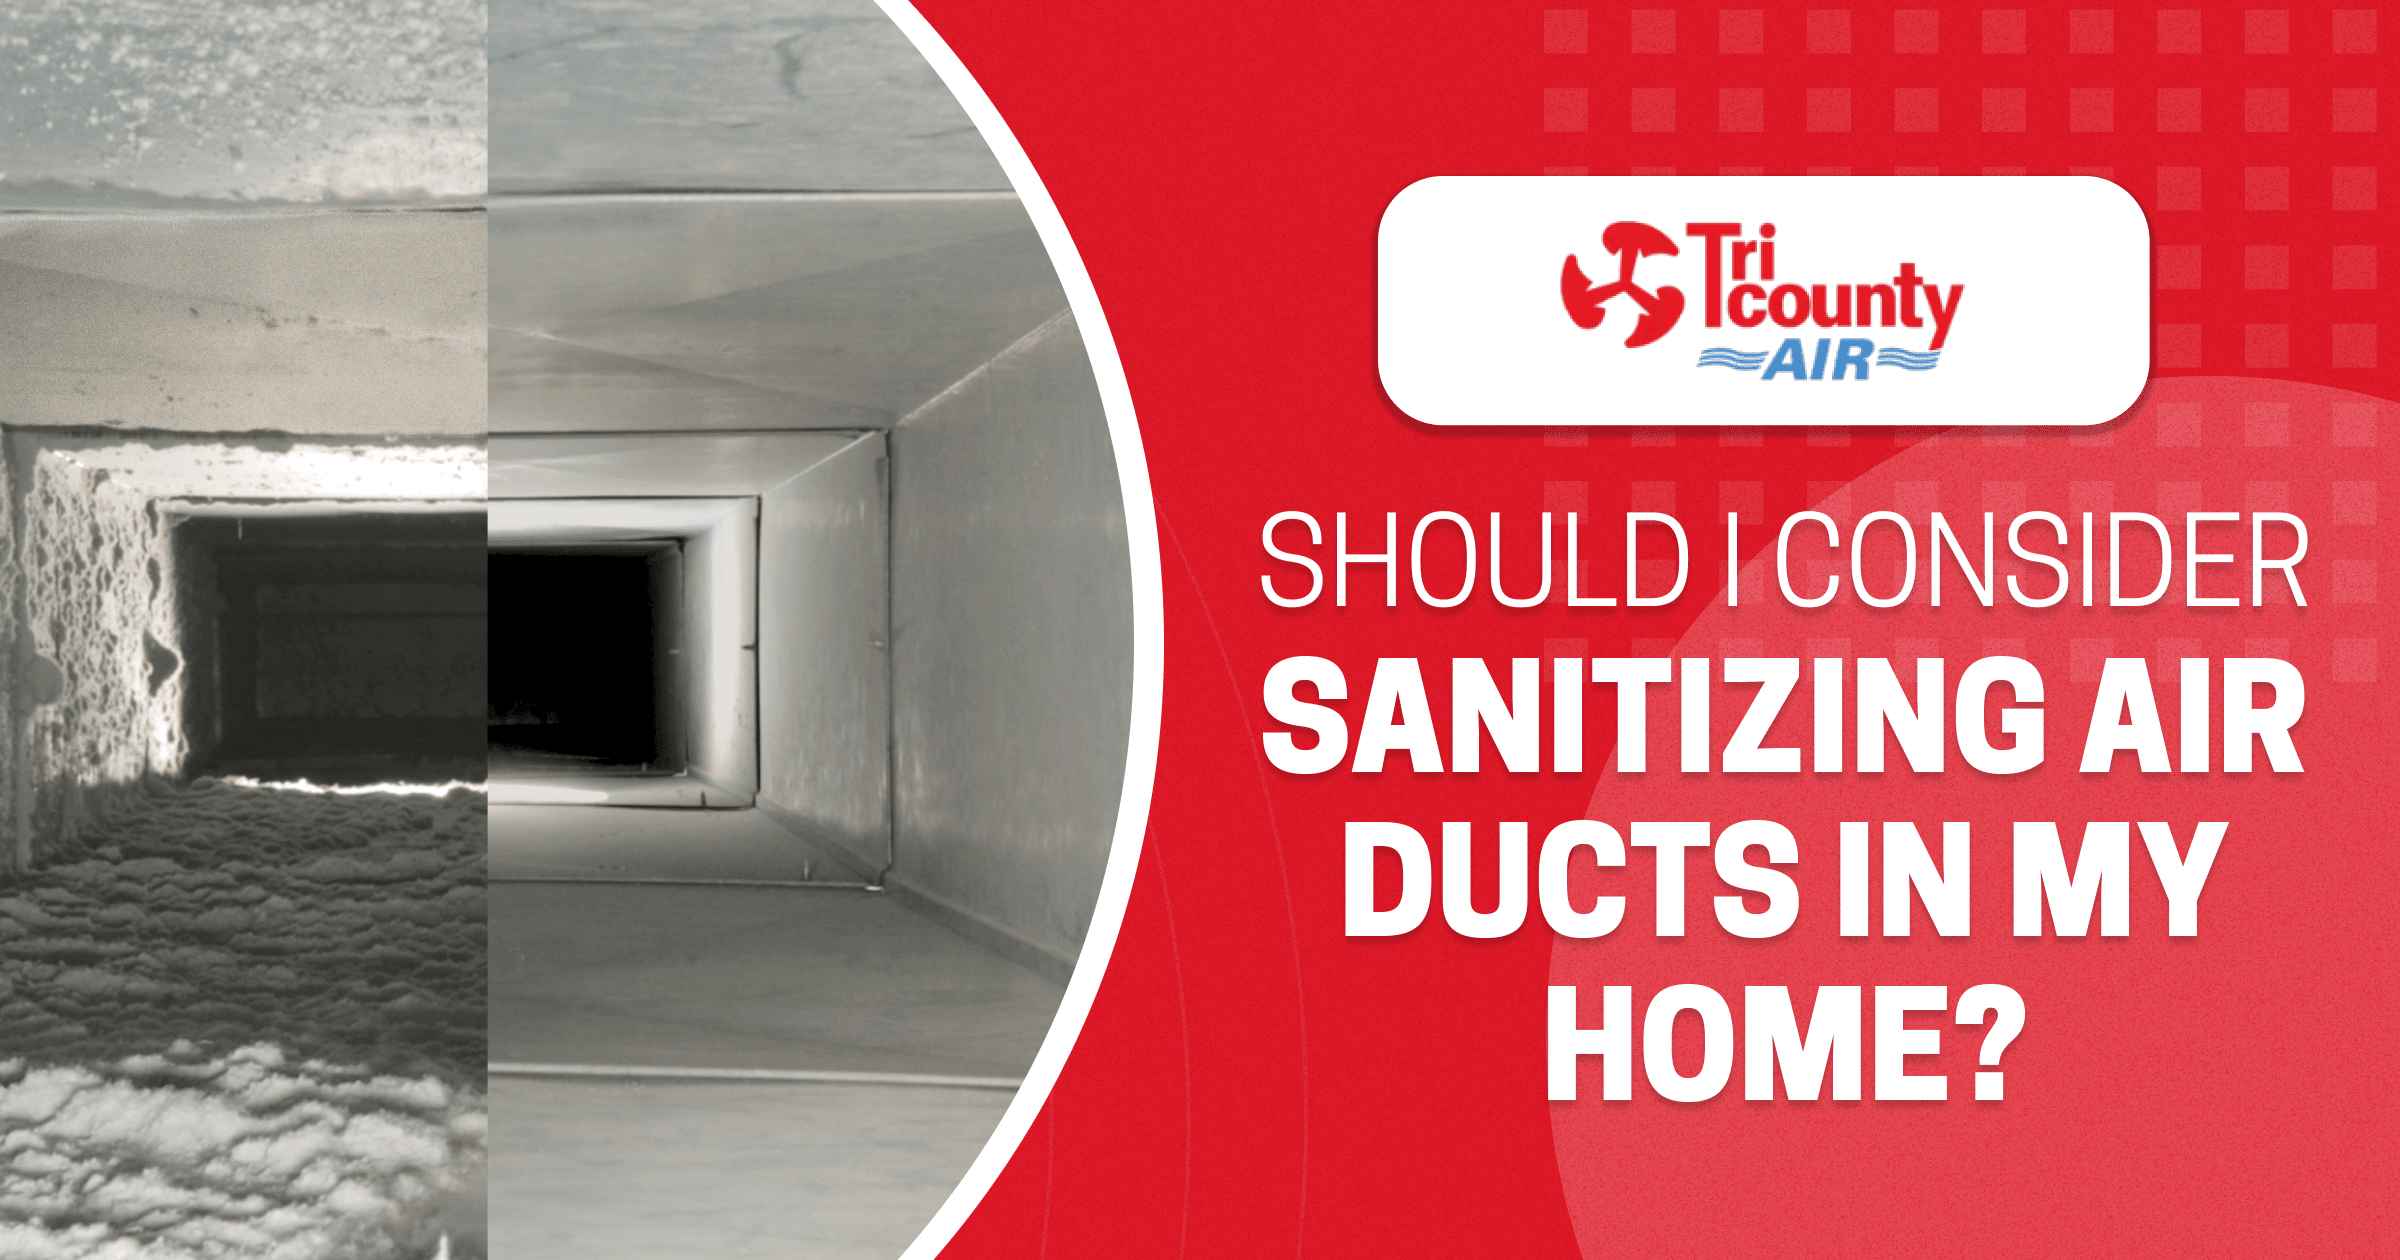 Should I Consider Sanitizing Air Ducts In My Home?